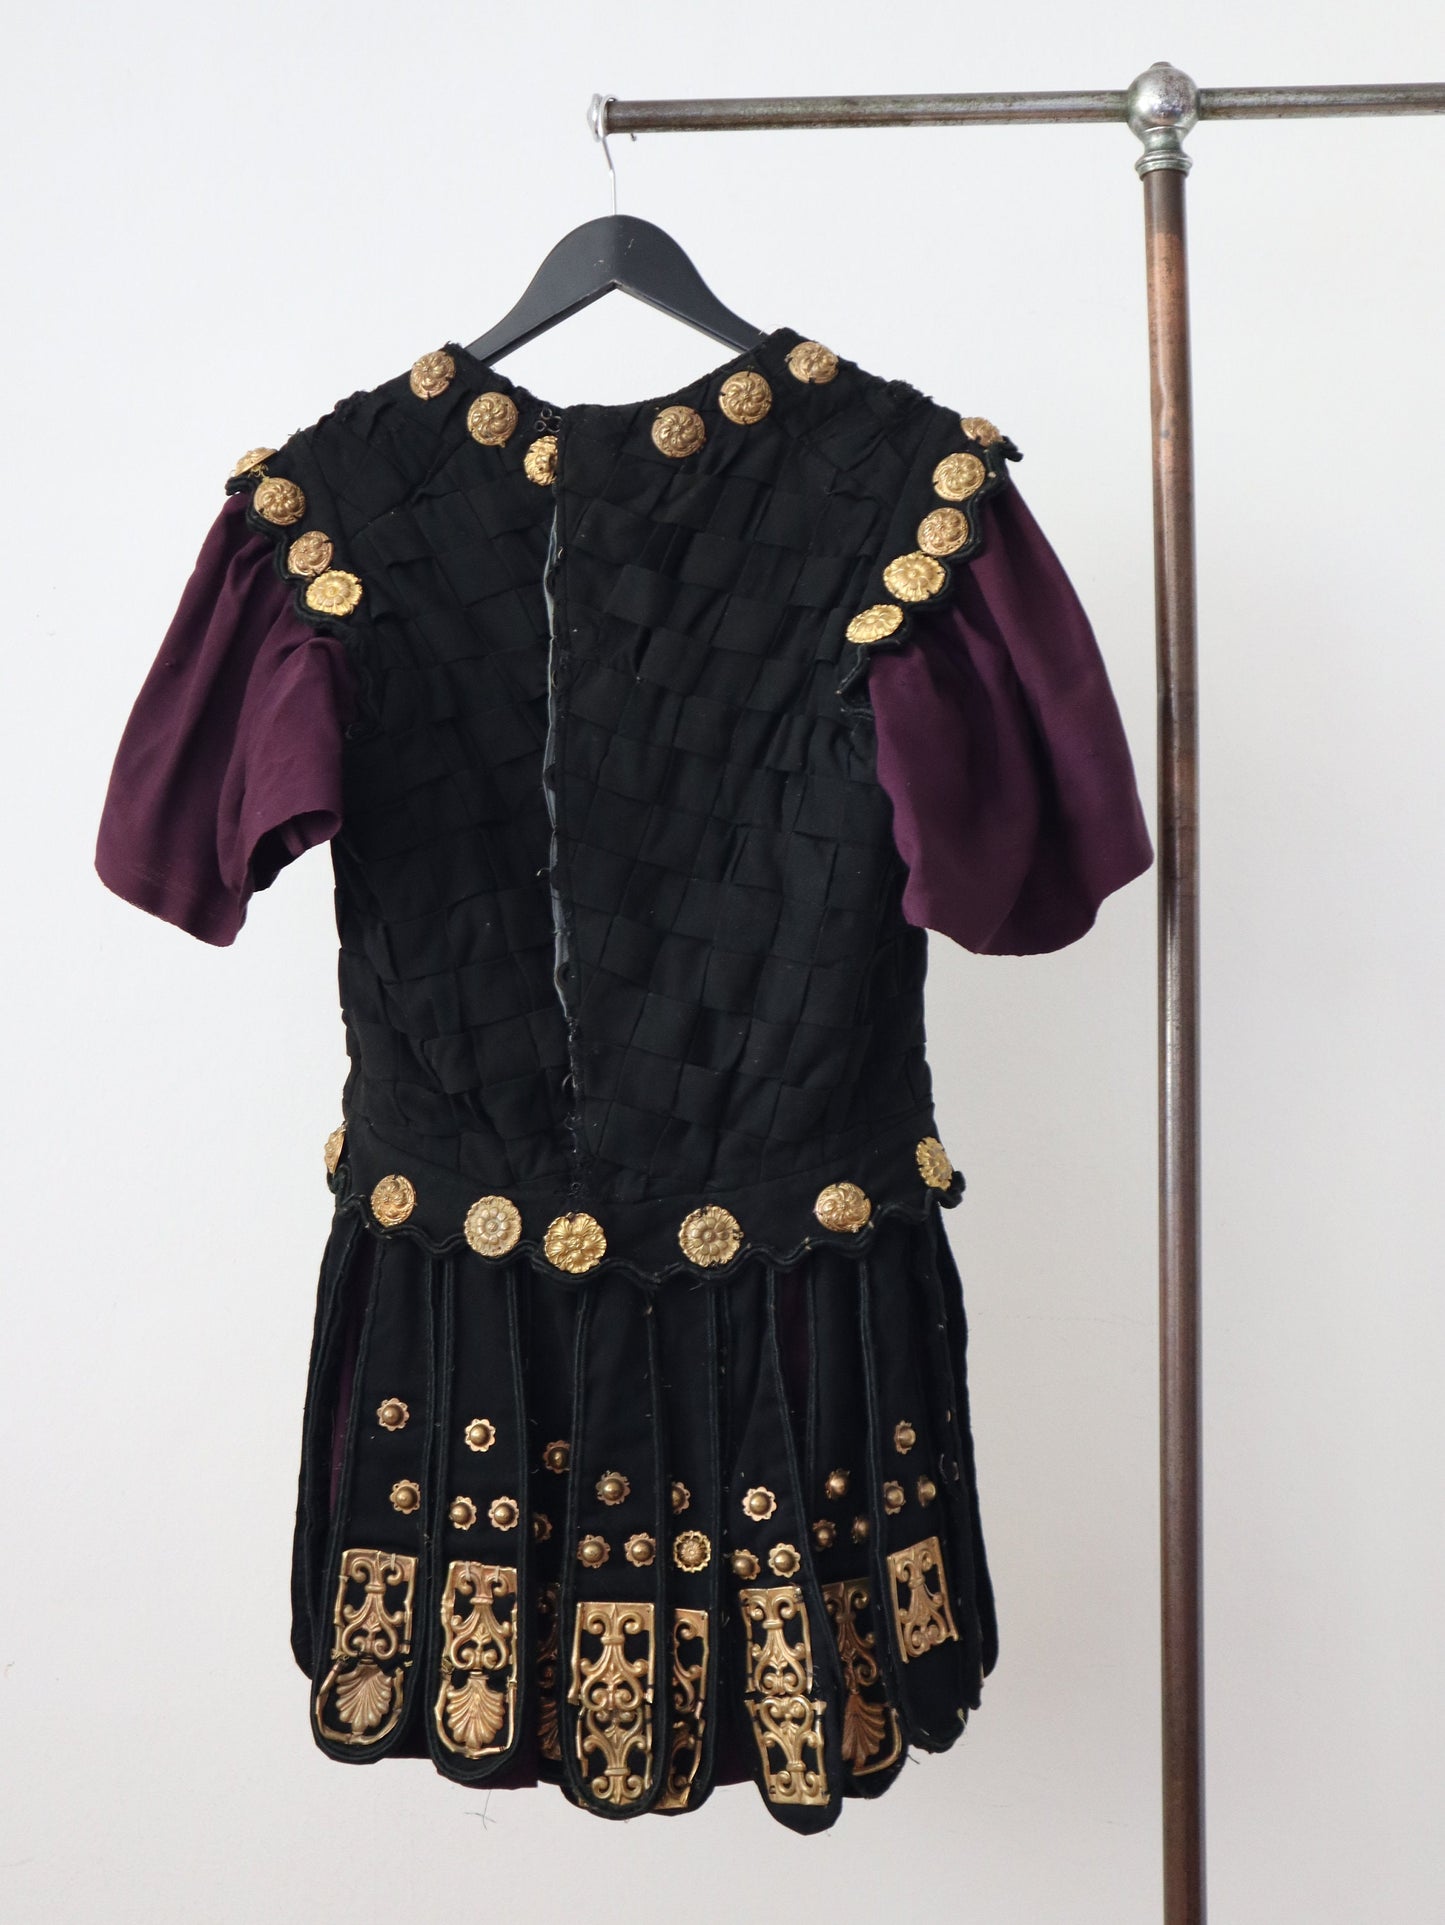 Antique French Opera Costume Centurion Roman Black Wool Gold Metal Lions Early 1900s Theatre